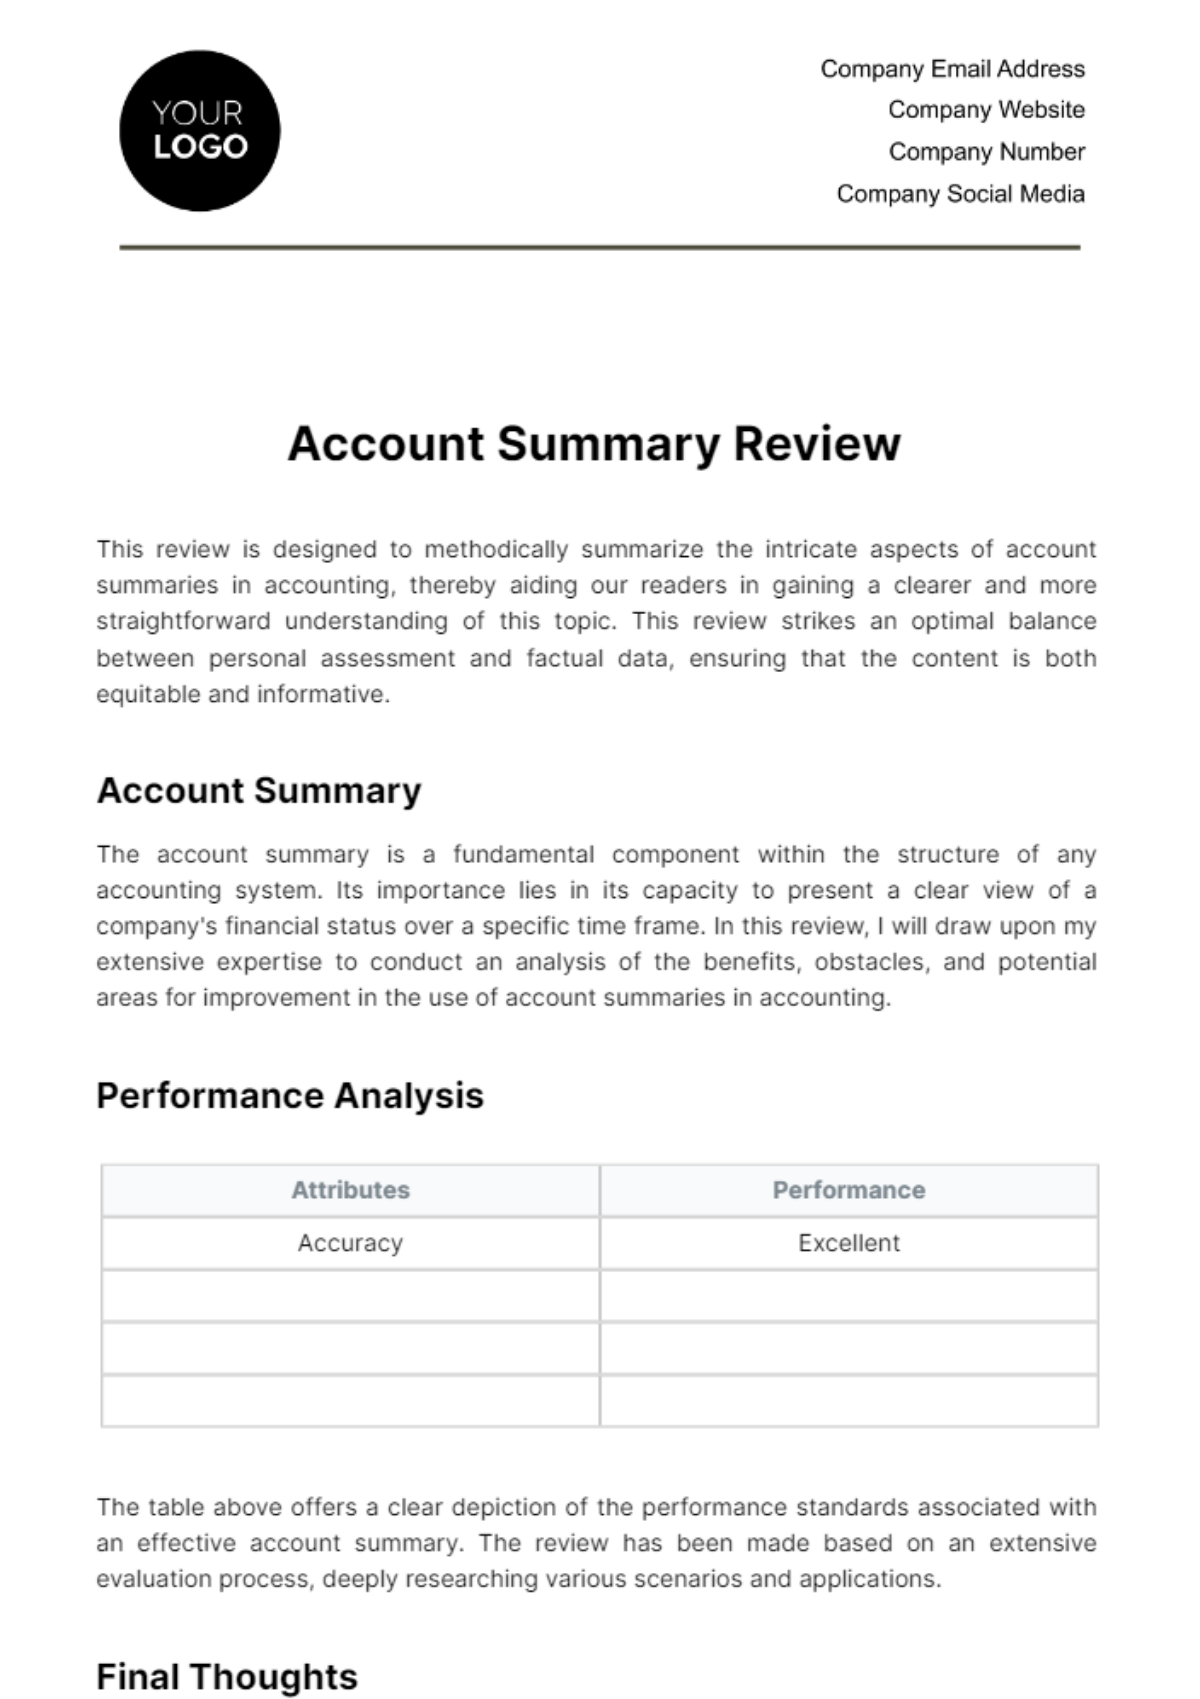 Free Account Summary Review Template